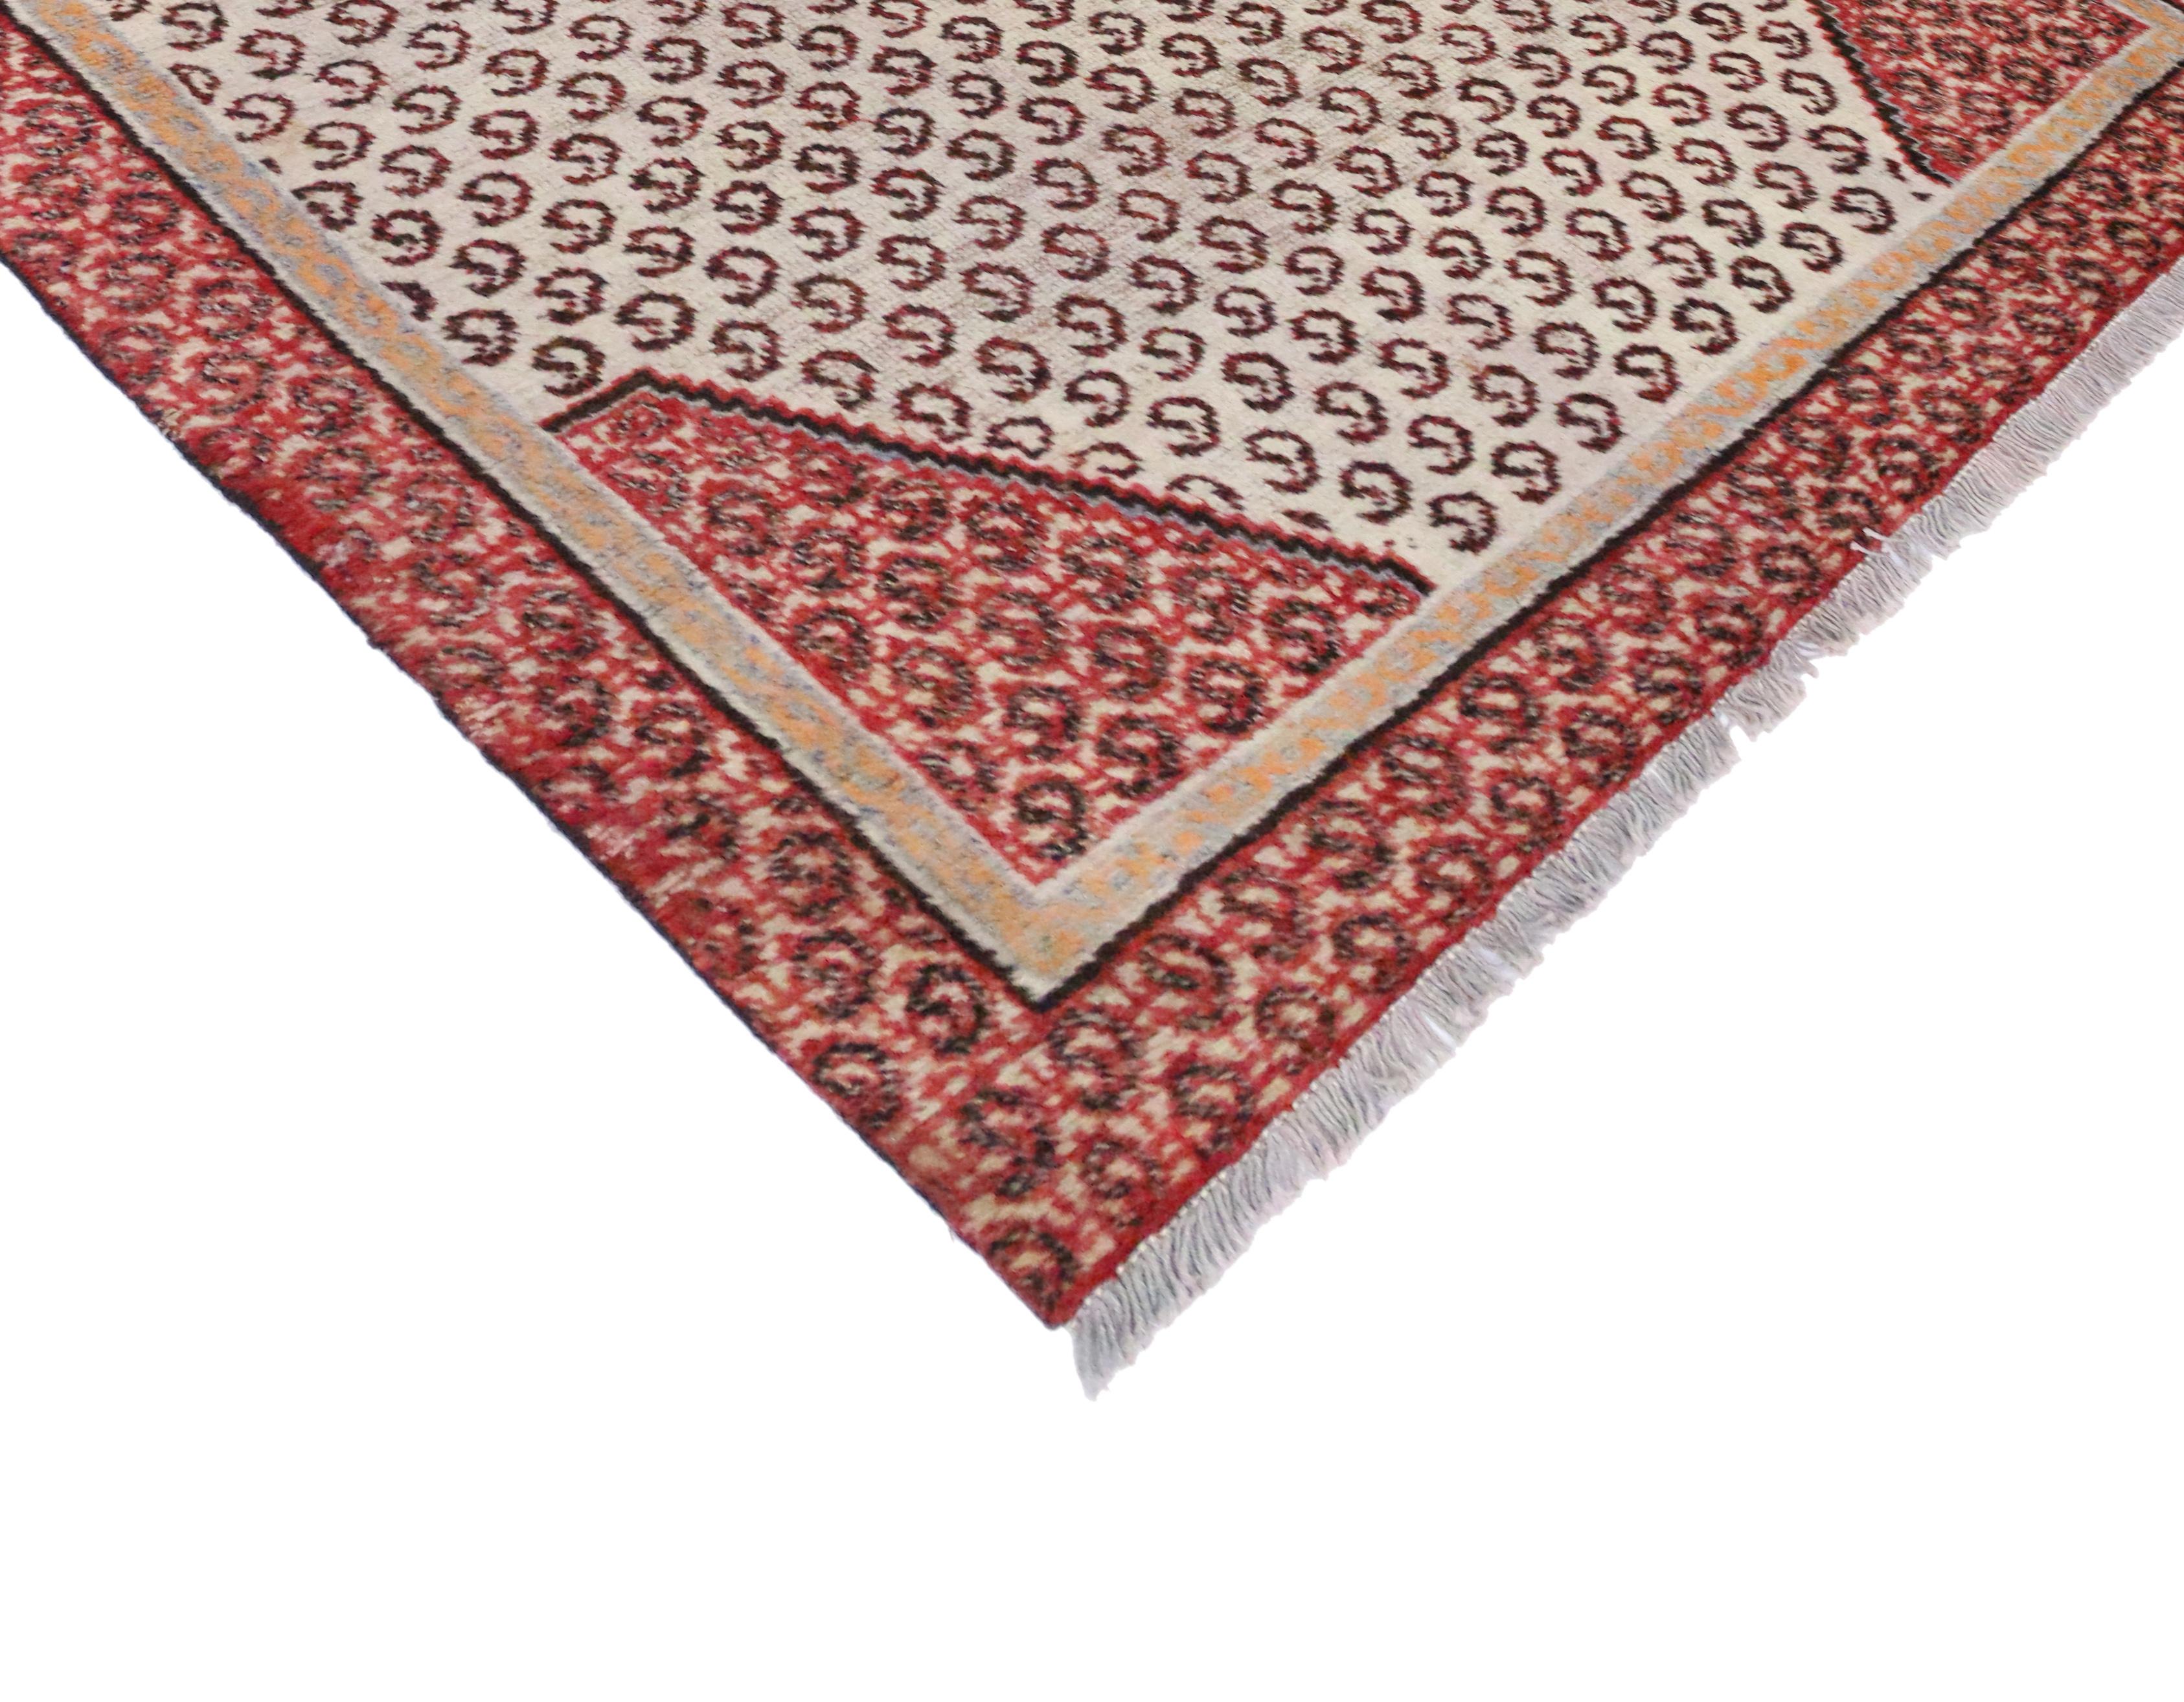 76260, vintage Persian Hamadan rug with all-over boteh. This hand-knotted wool vintage Persian Hamadan rug features an all-over boteh pattern with a central diamond medallion. It is enclosed with red corner spandrels and border both composed with an